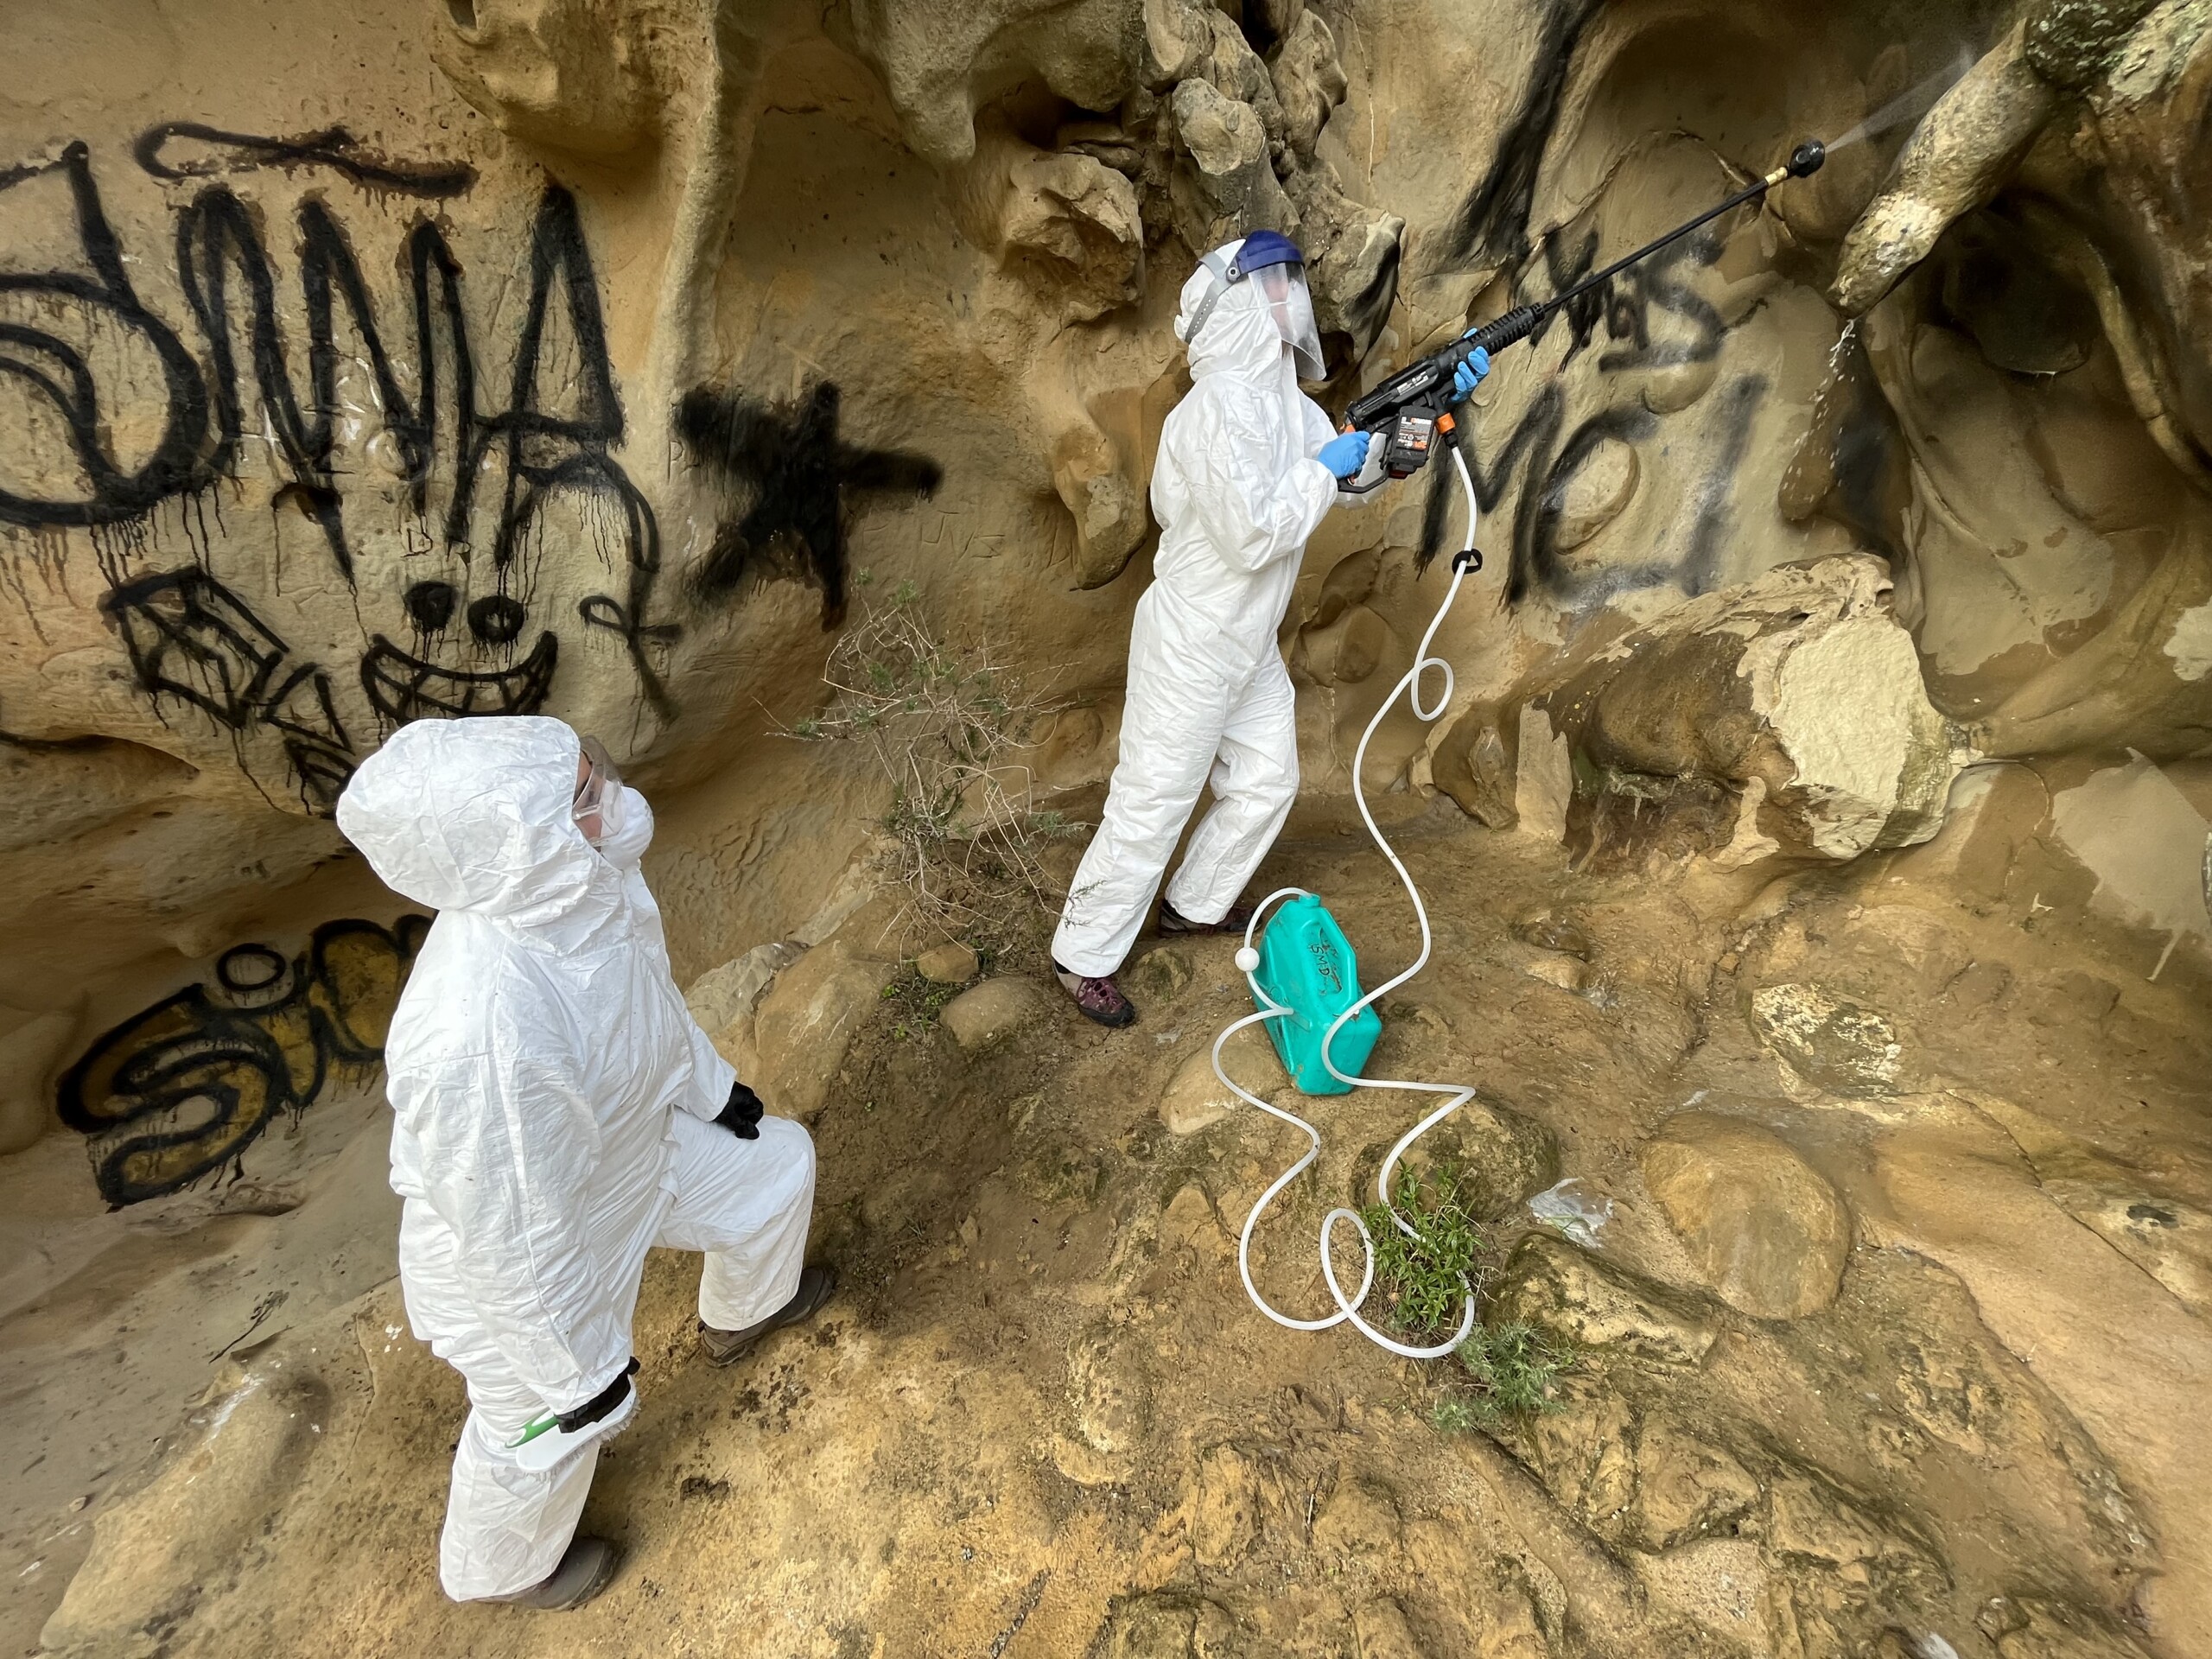 Two people using a power washer to clean graffiti off rocks